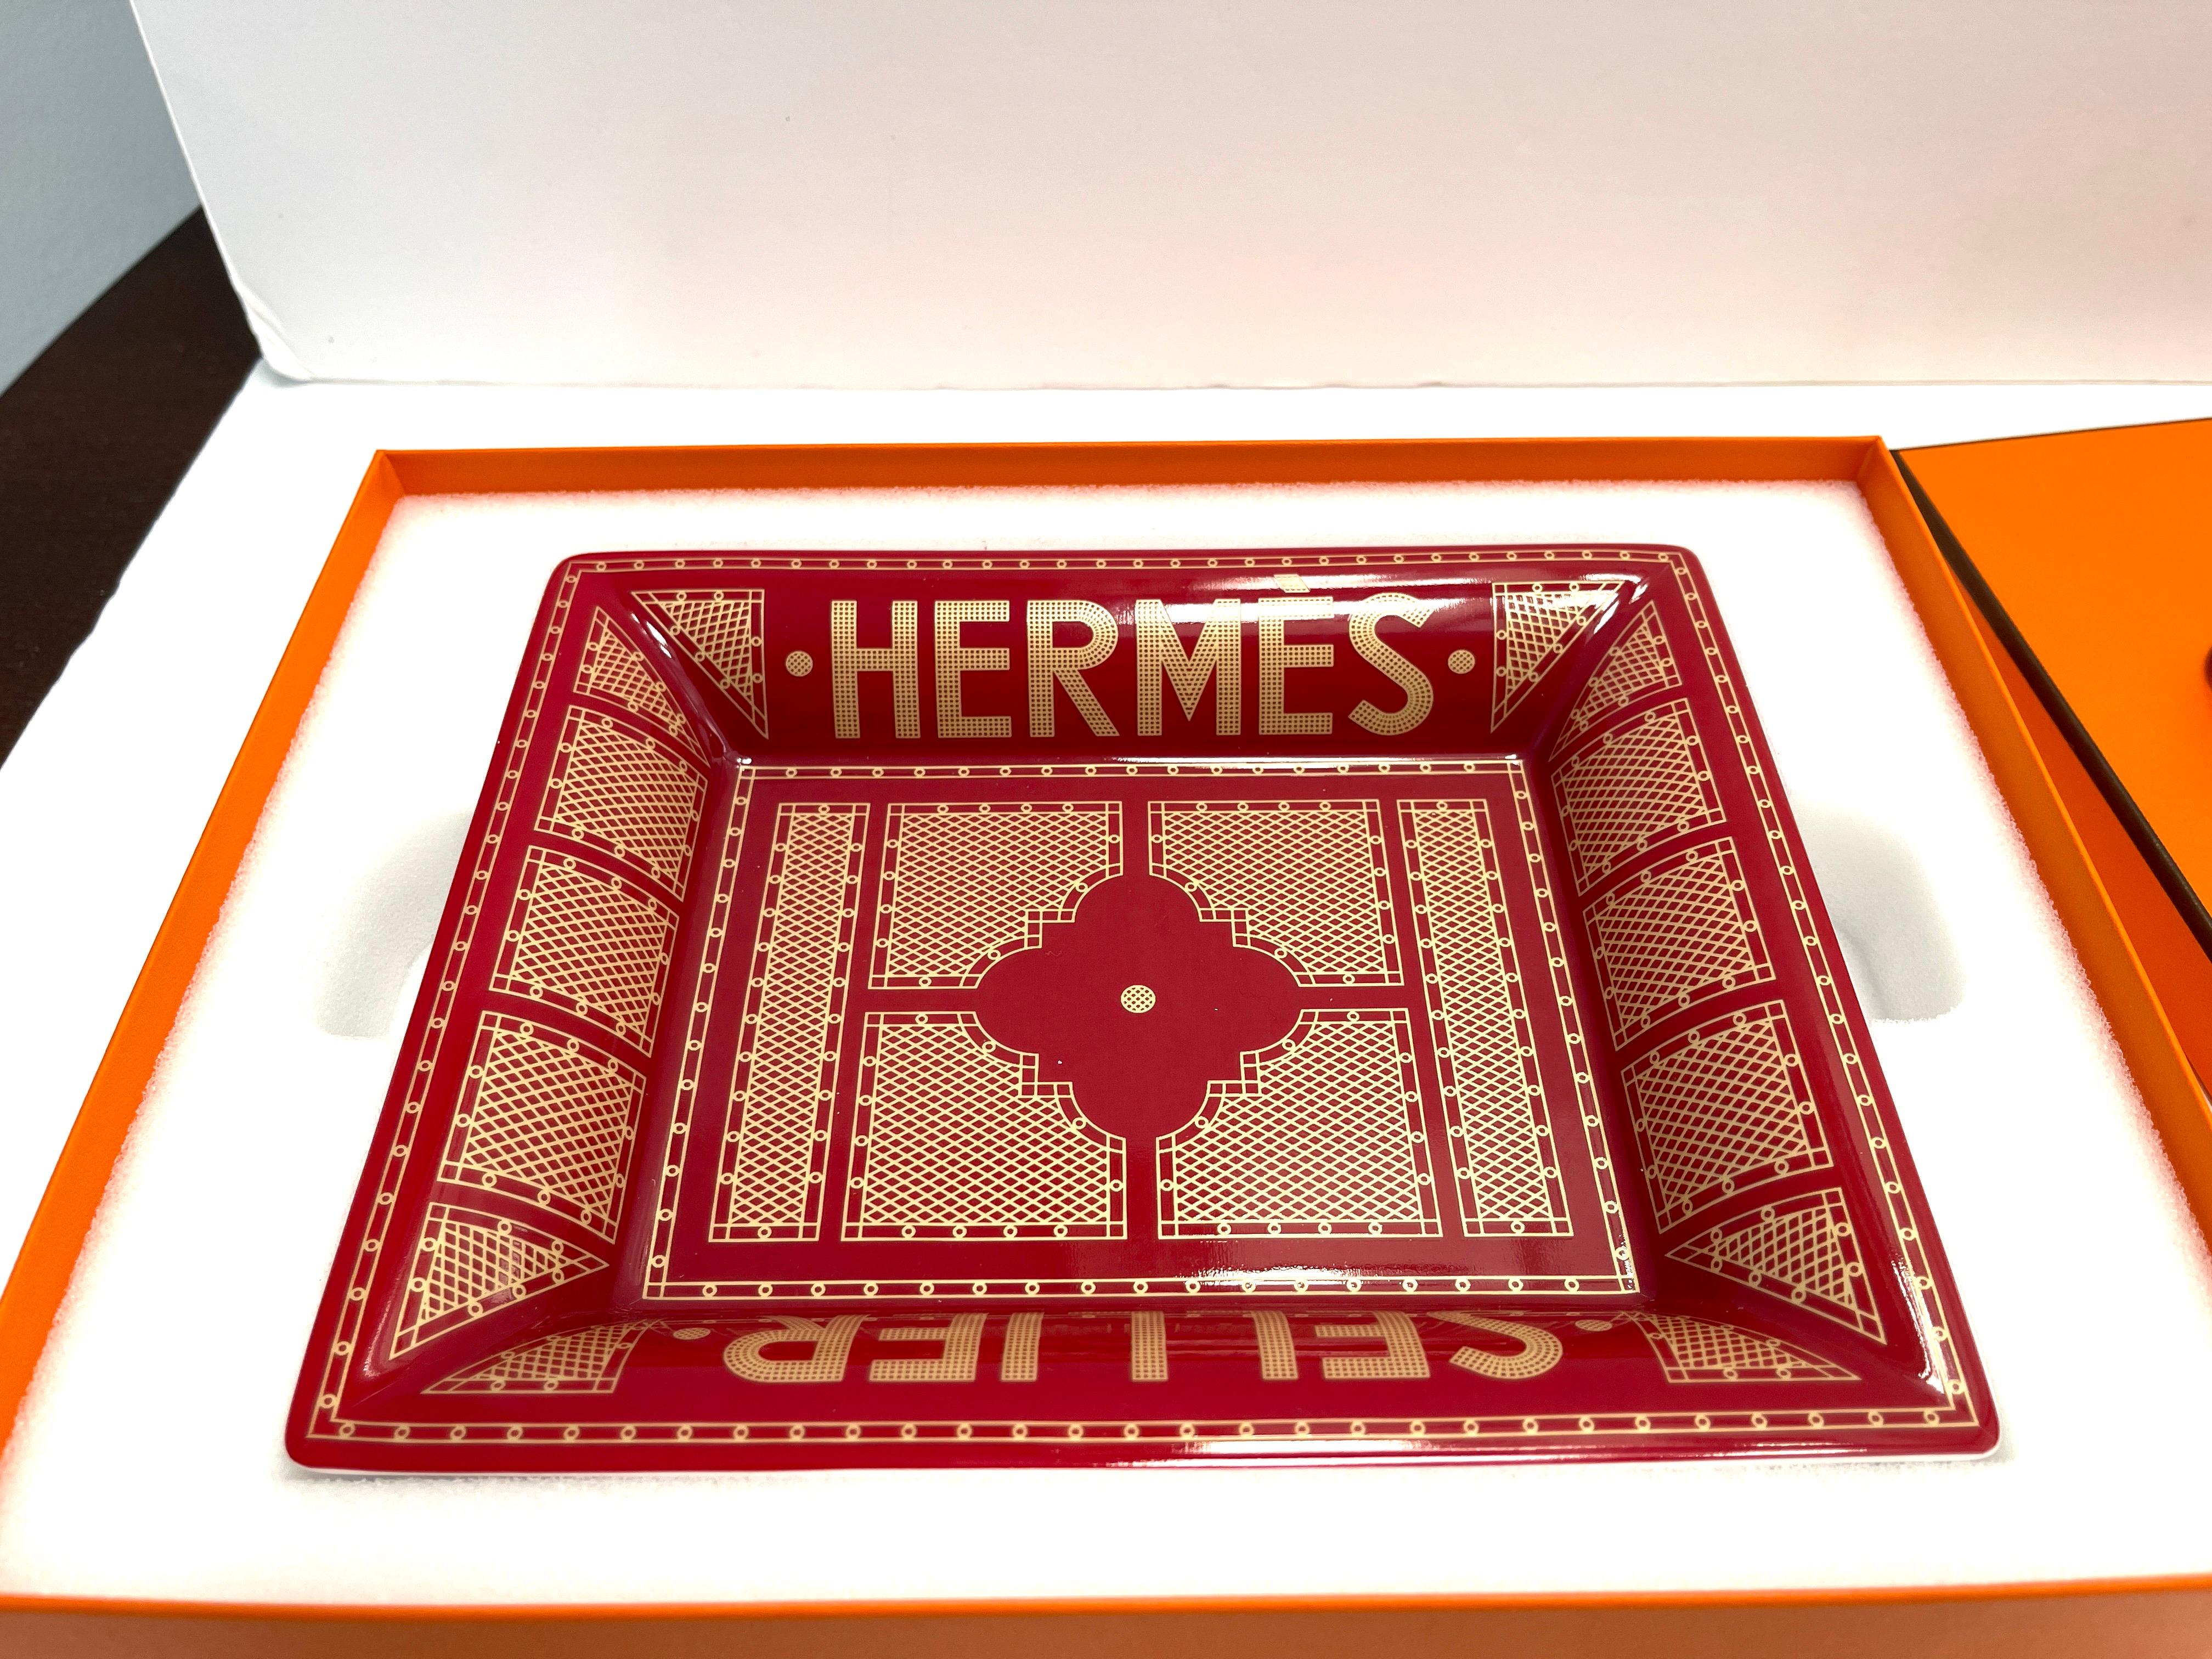 Brand new Hermes Porcelain Tray
Hermes Sellier Change Tray
Rouge Or
Red and Gold Change tray in porcelain with velvet goatskin base
Hermes Paris on Base
Decorated using chromolithography

Made in France

Designed by Benoît-Pierre Emery

Approx